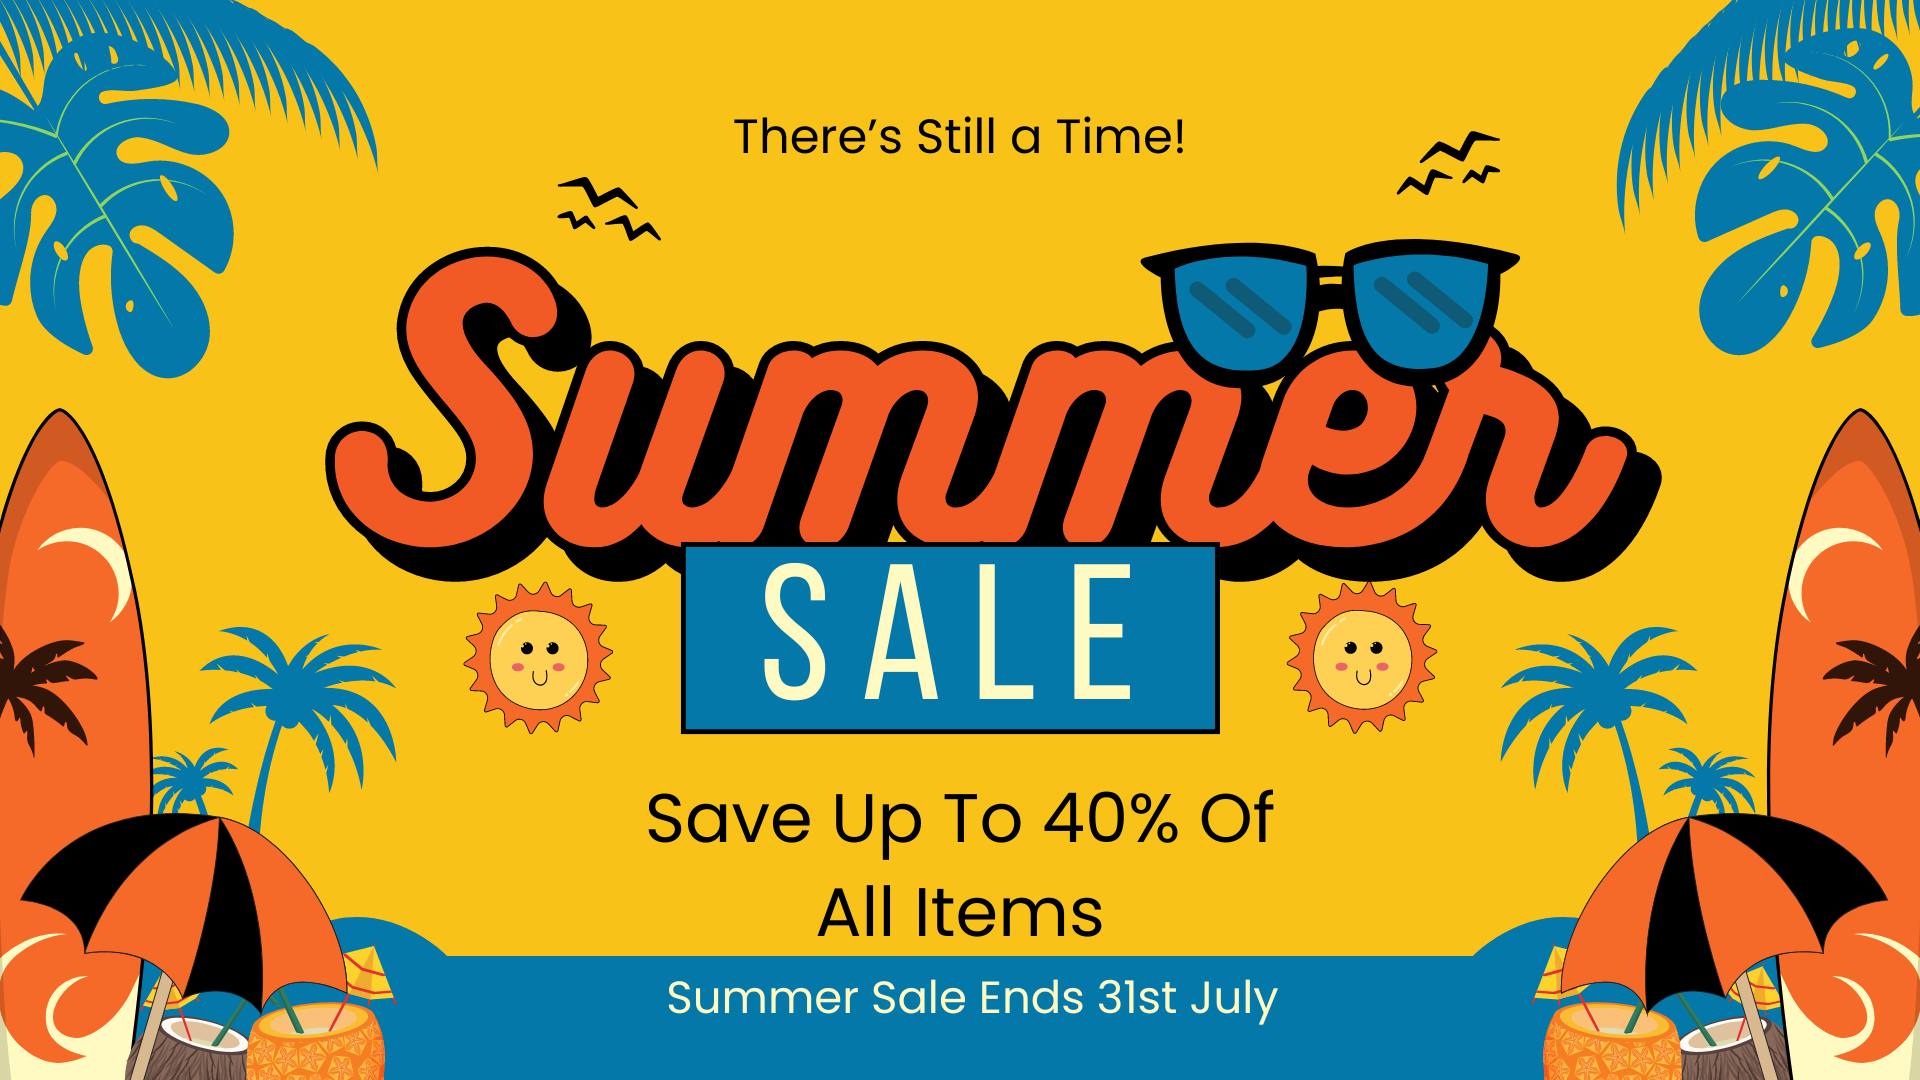 Summer Sale is on! Save Up To 40% Of all items! Summer Sale Ends 31st July.